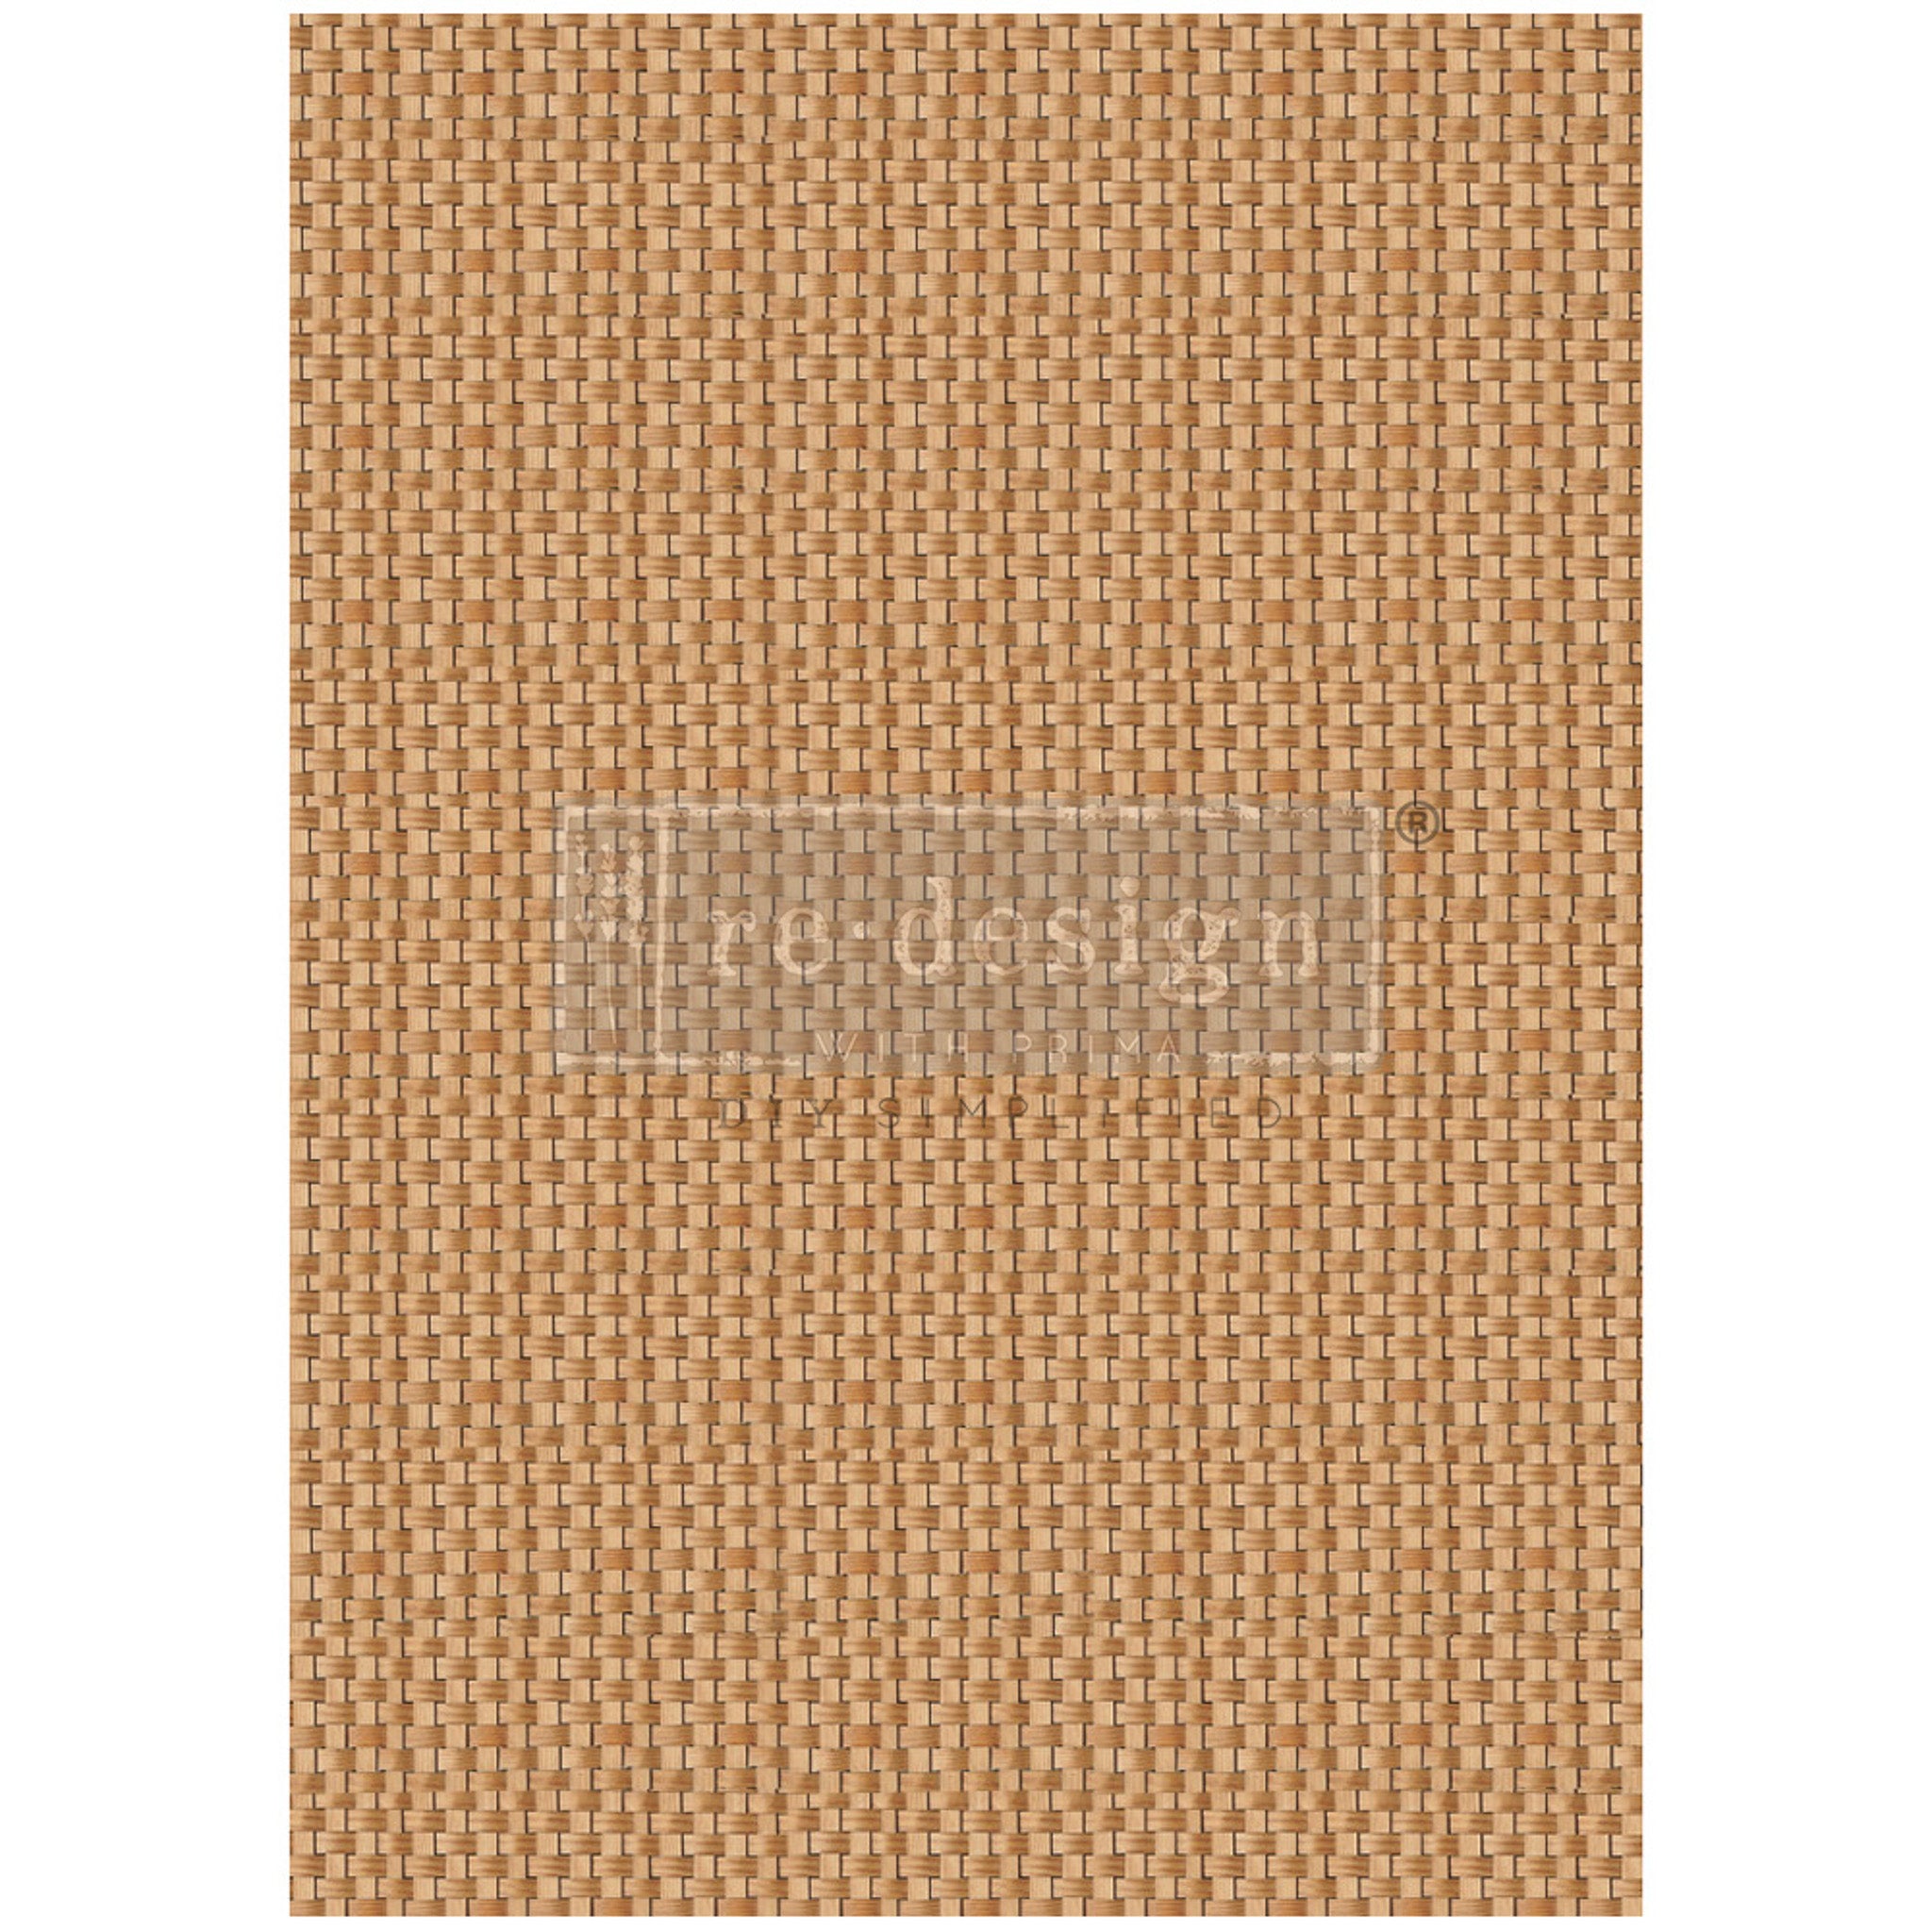 A1 fiber paper design that features a repeating square basket weave pattern in a neutral palette. White borders are on the sides.